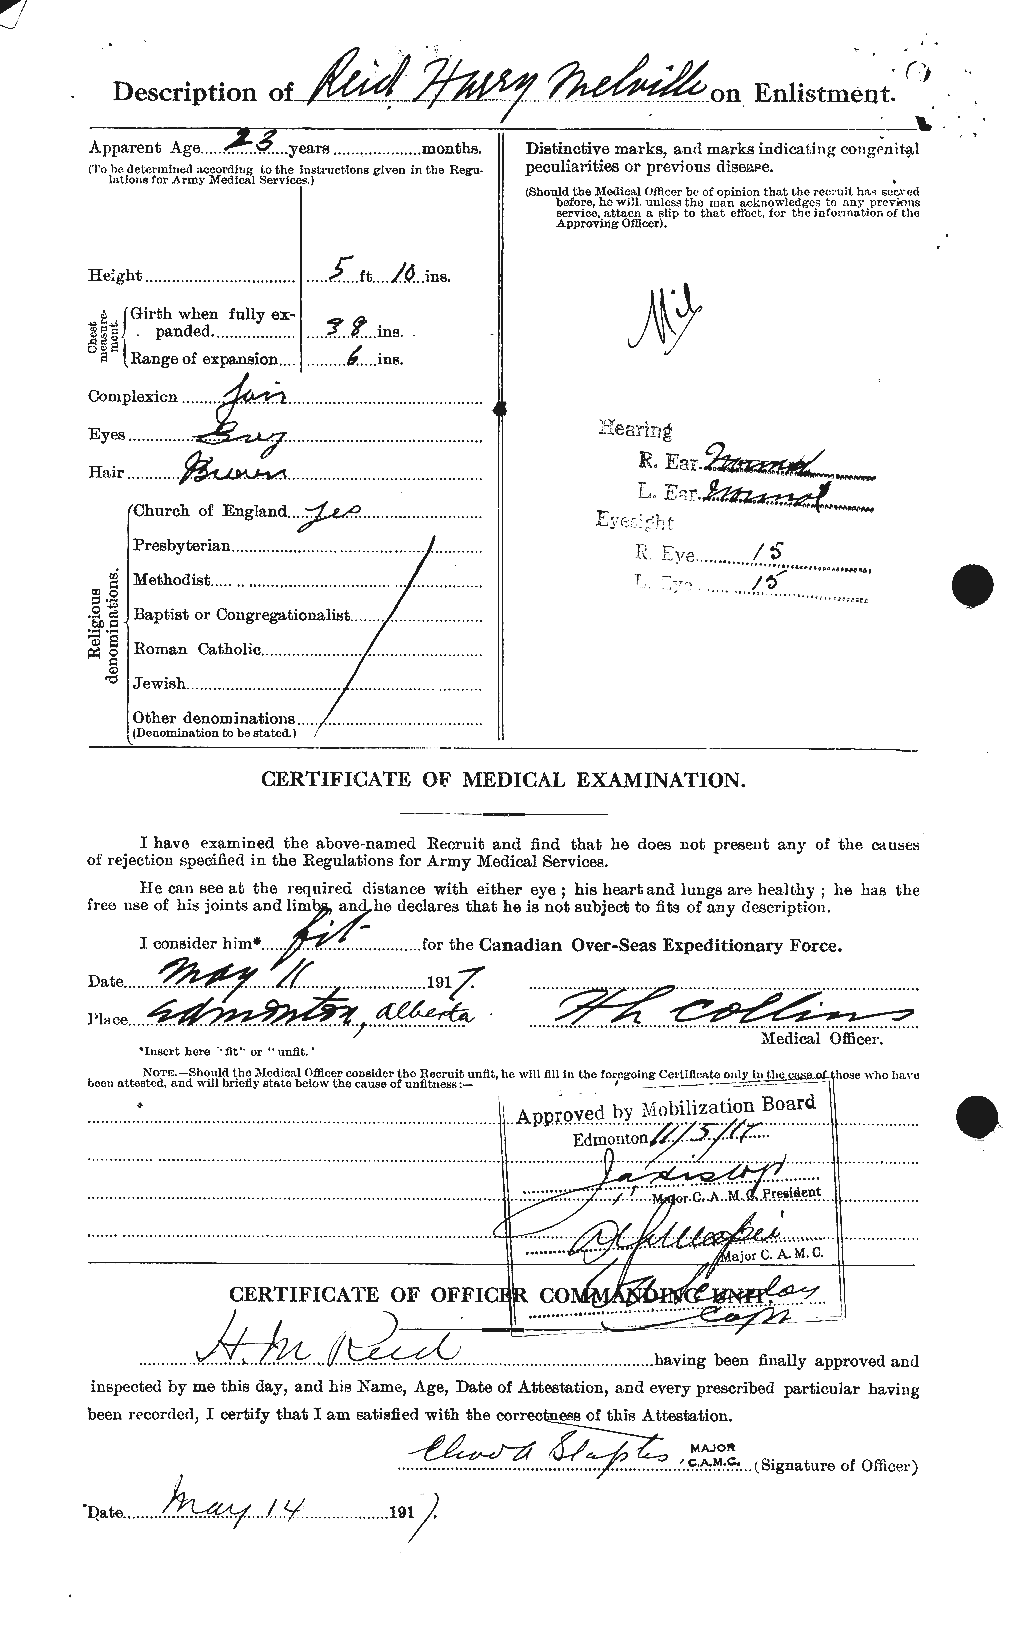 Personnel Records of the First World War - CEF 598587b